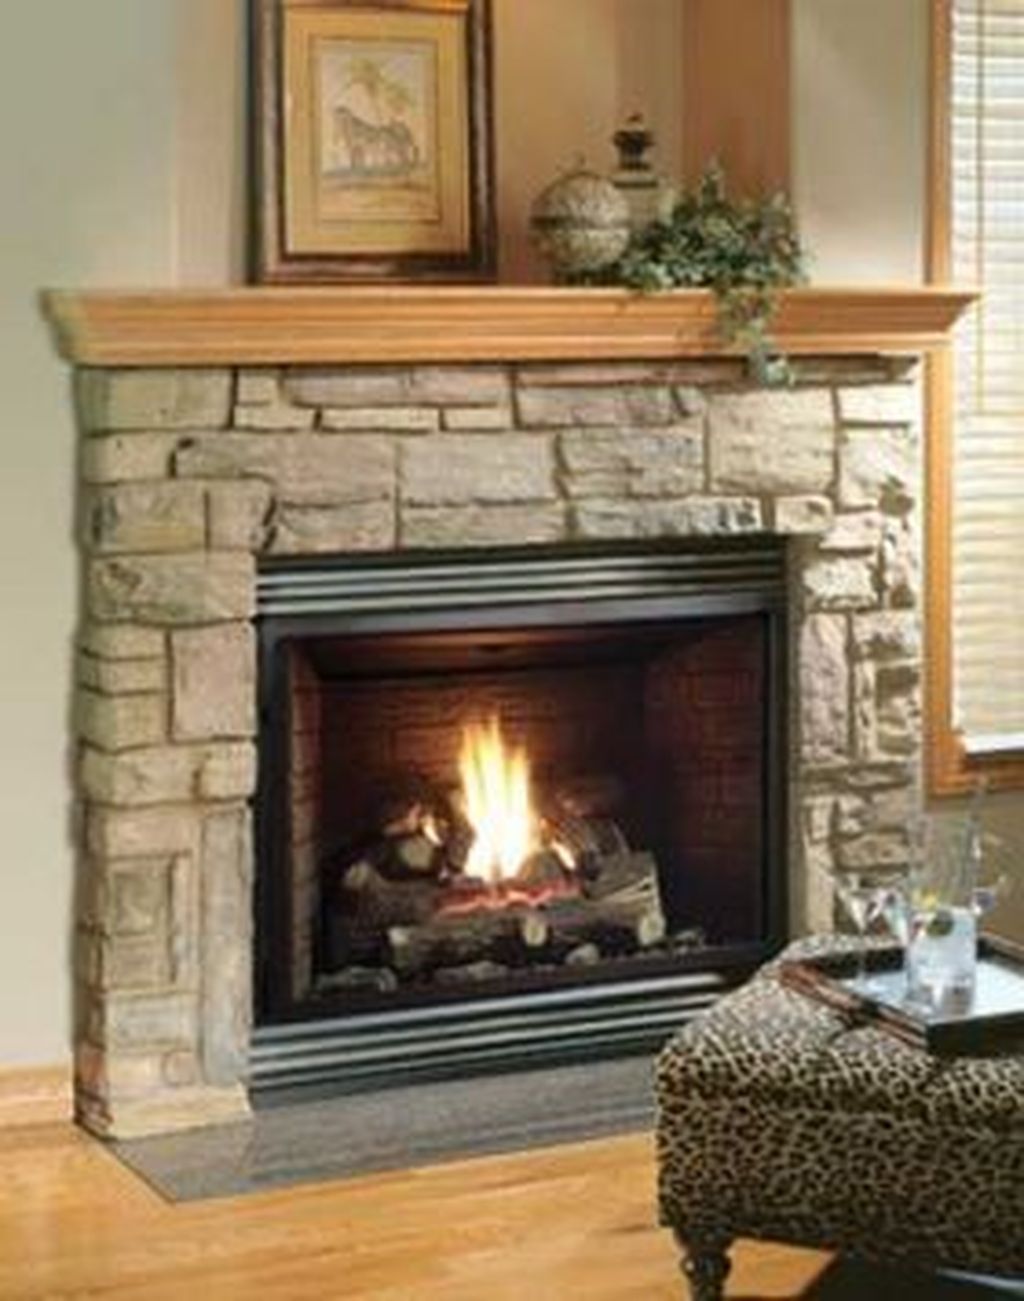 Fireplace Mantel Heaters Awesome 42 Relaxing Living Rooms Design Ideas with Fireplaces